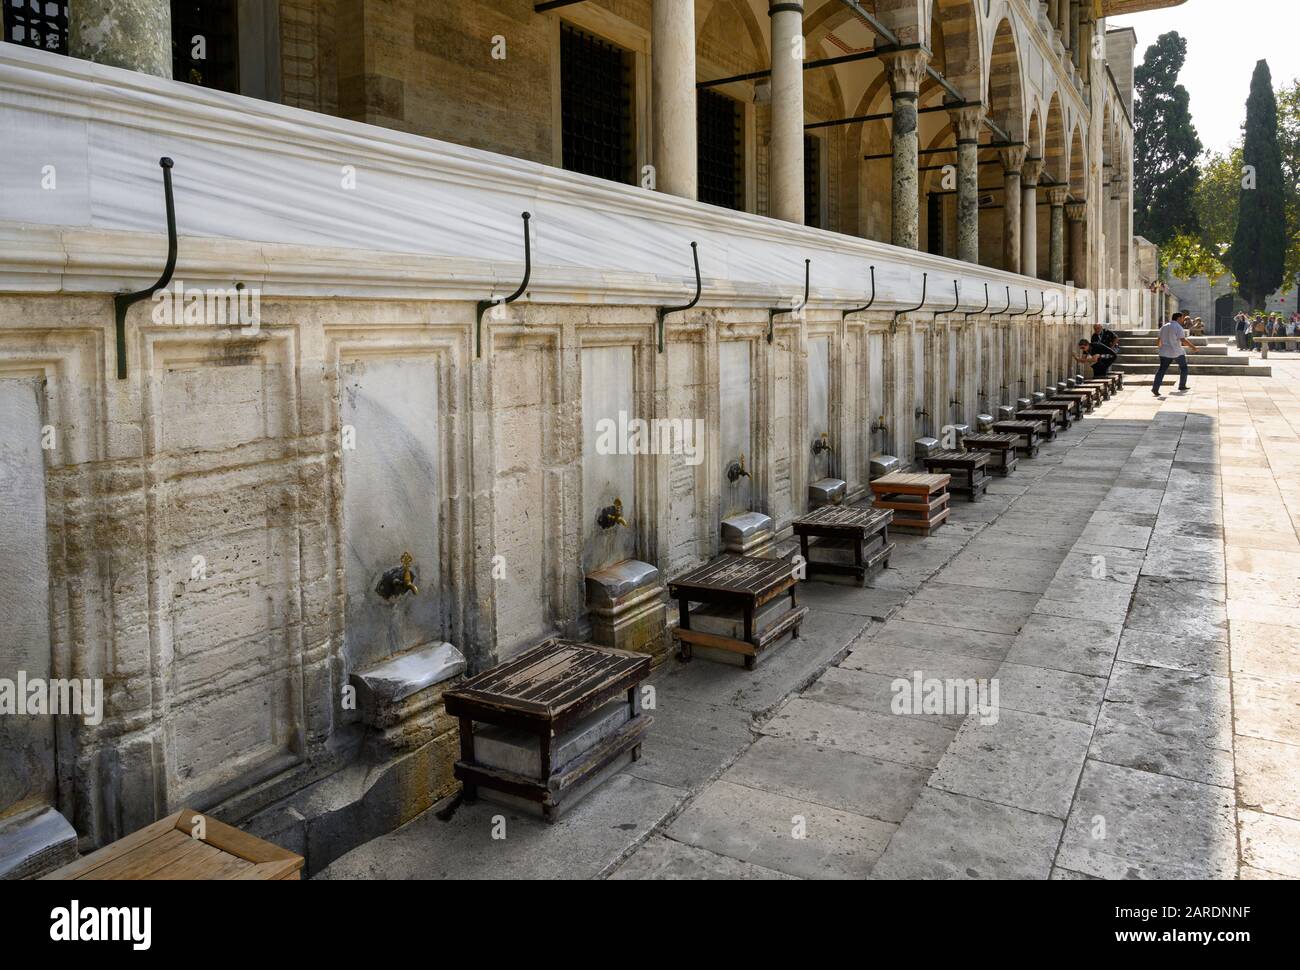 Ritual cleansing stations with faucets and benches outside Suleymaniye Mosque in Istanbul, Turkey Stock Photo